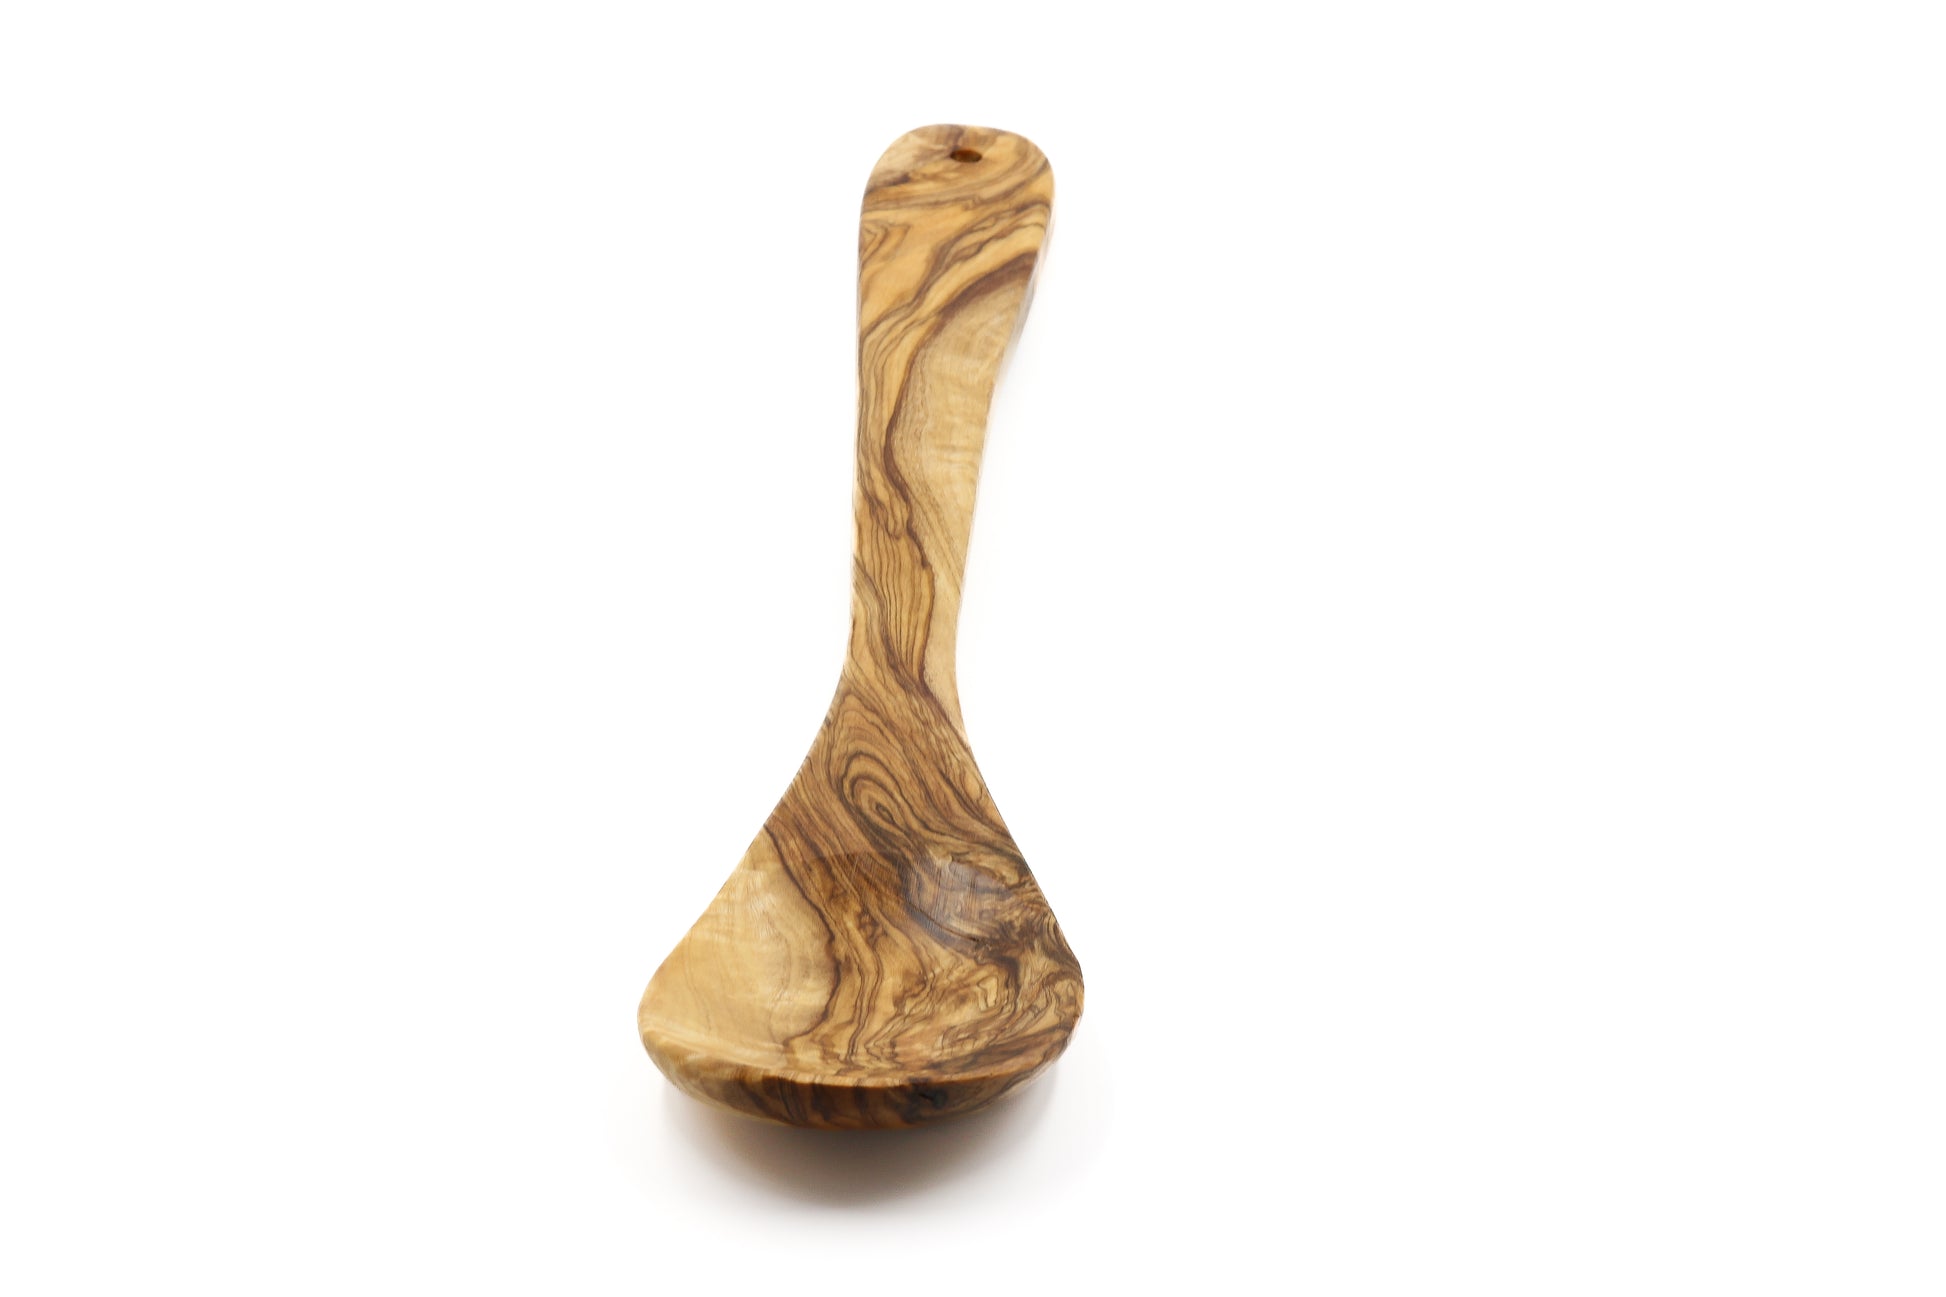 Cook with style and tradition using this olive wood utensil